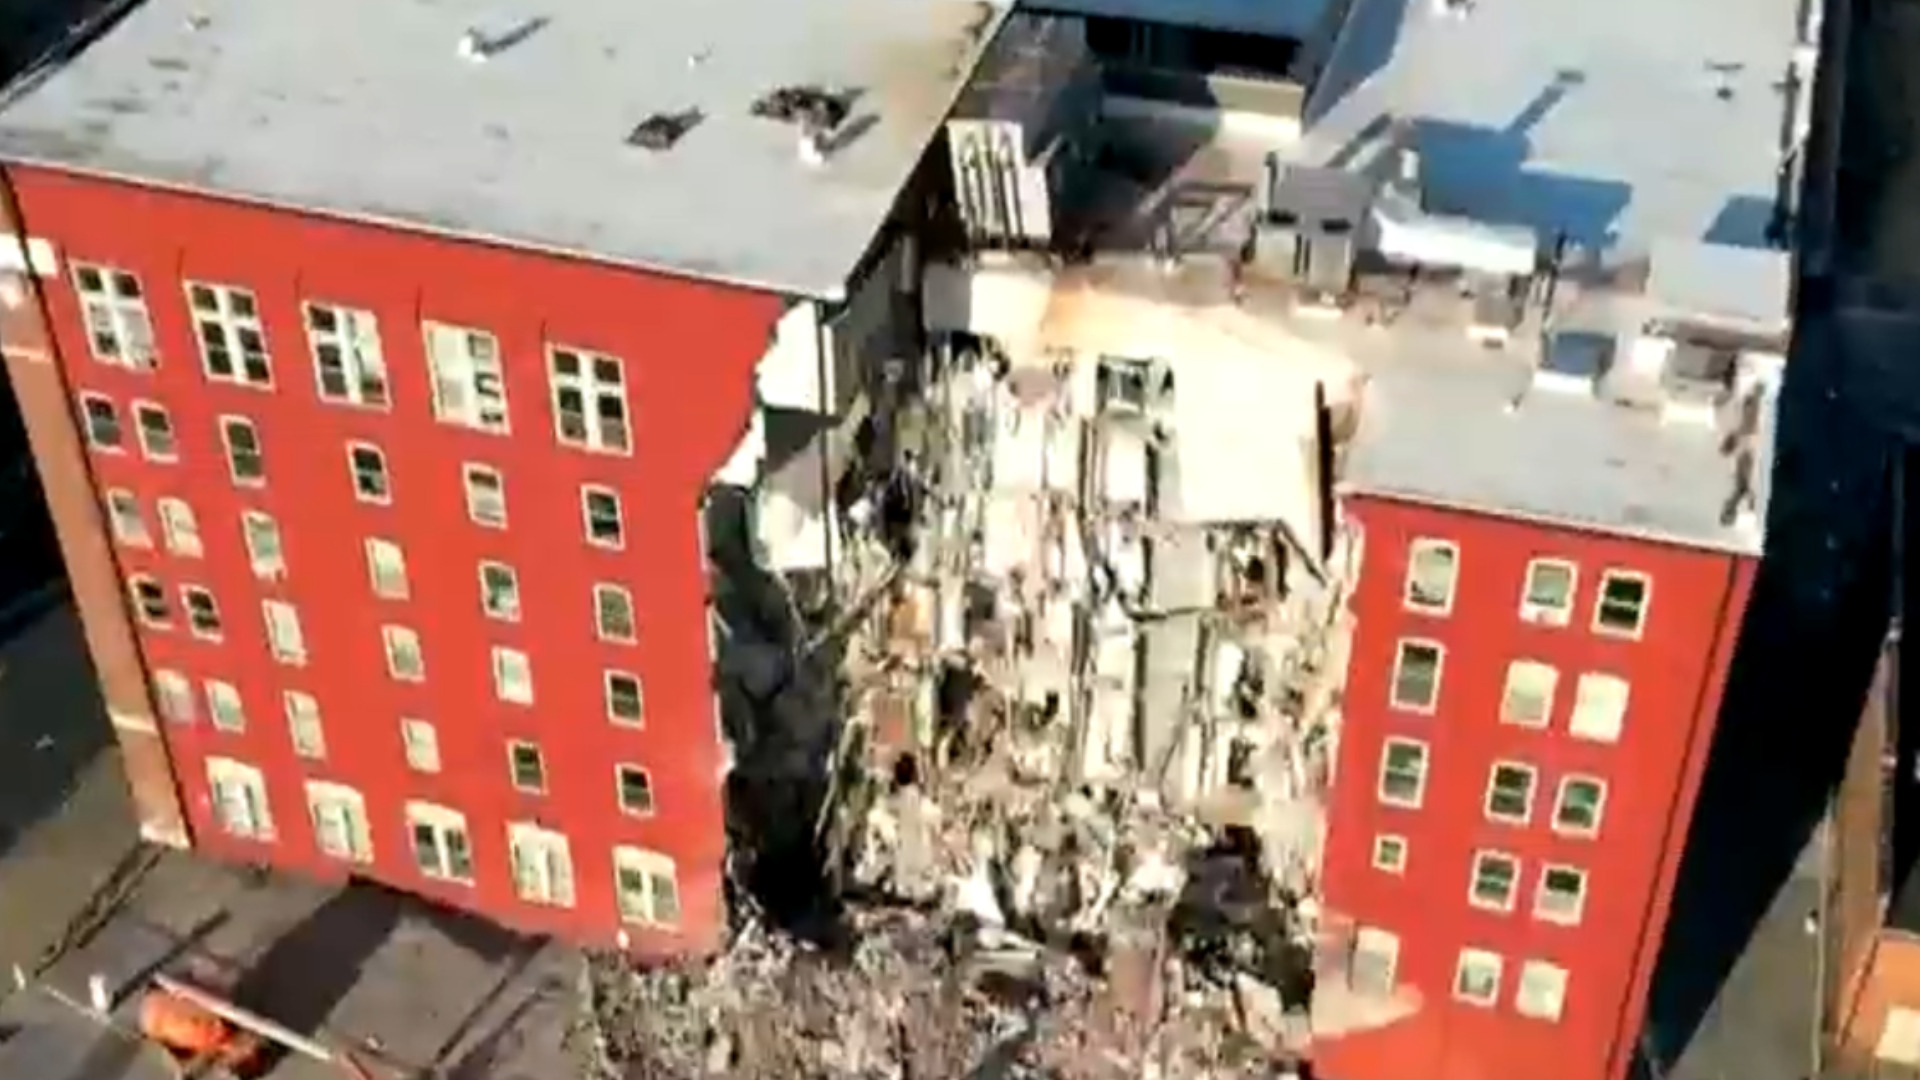 Watch CBS Evening News: 3 residents unaccounted for in building ...